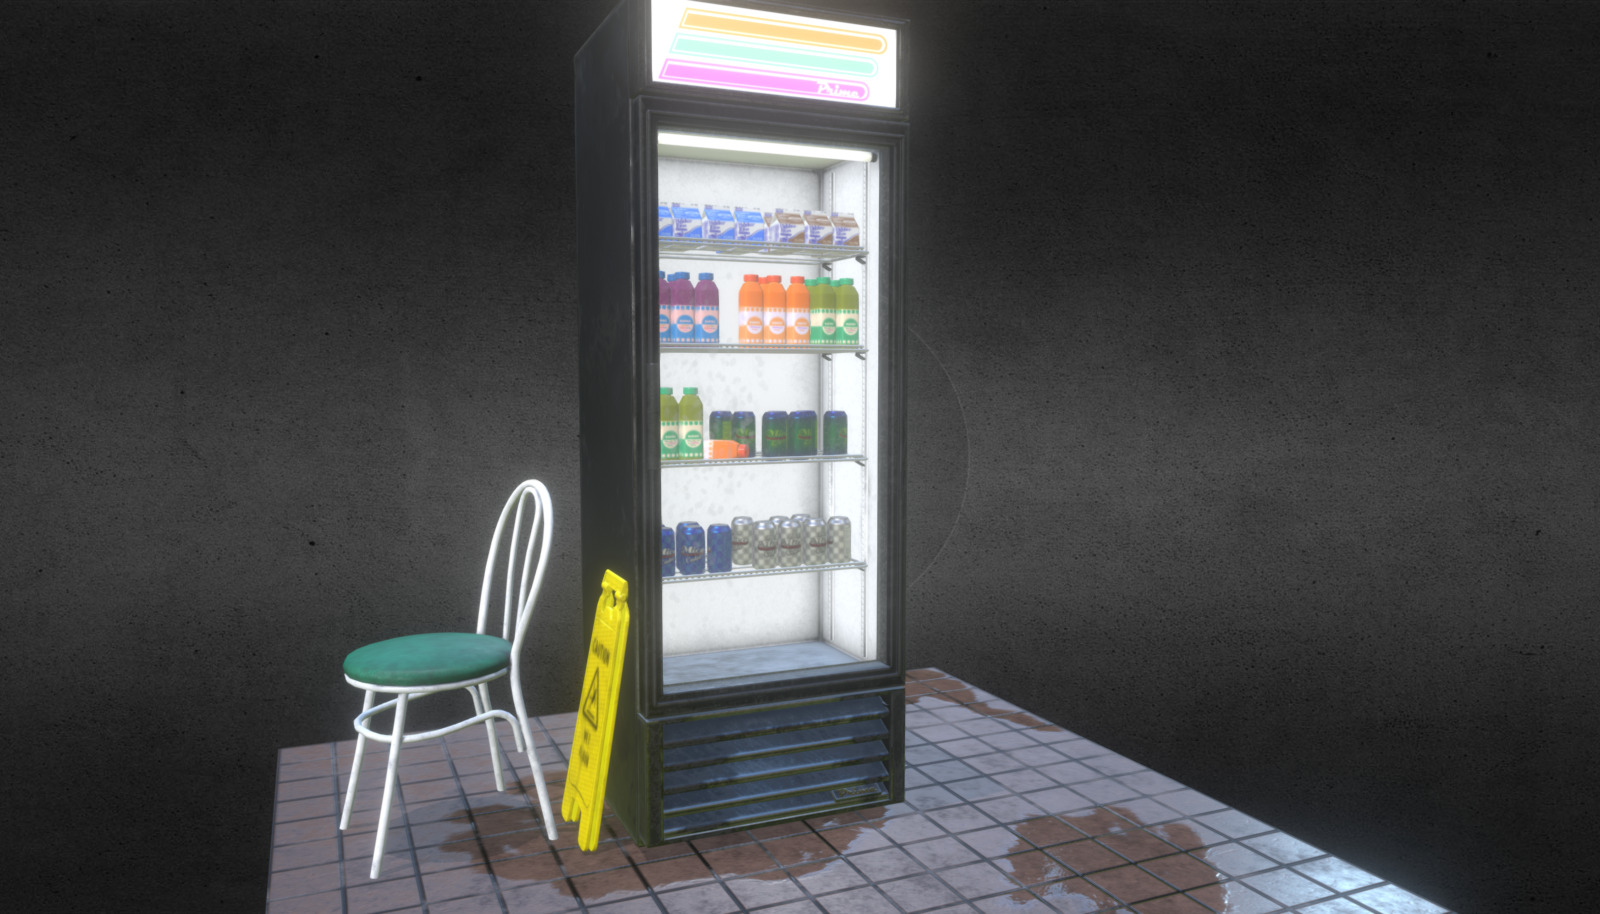 I am currently working on my first full environment for Unreal 4.  This is the first of many assets I will be creating for that scene.  Any thoughts or suggestions are greatly appreciated :) - Beverage Display Case - 3D model by HH3D 3d model